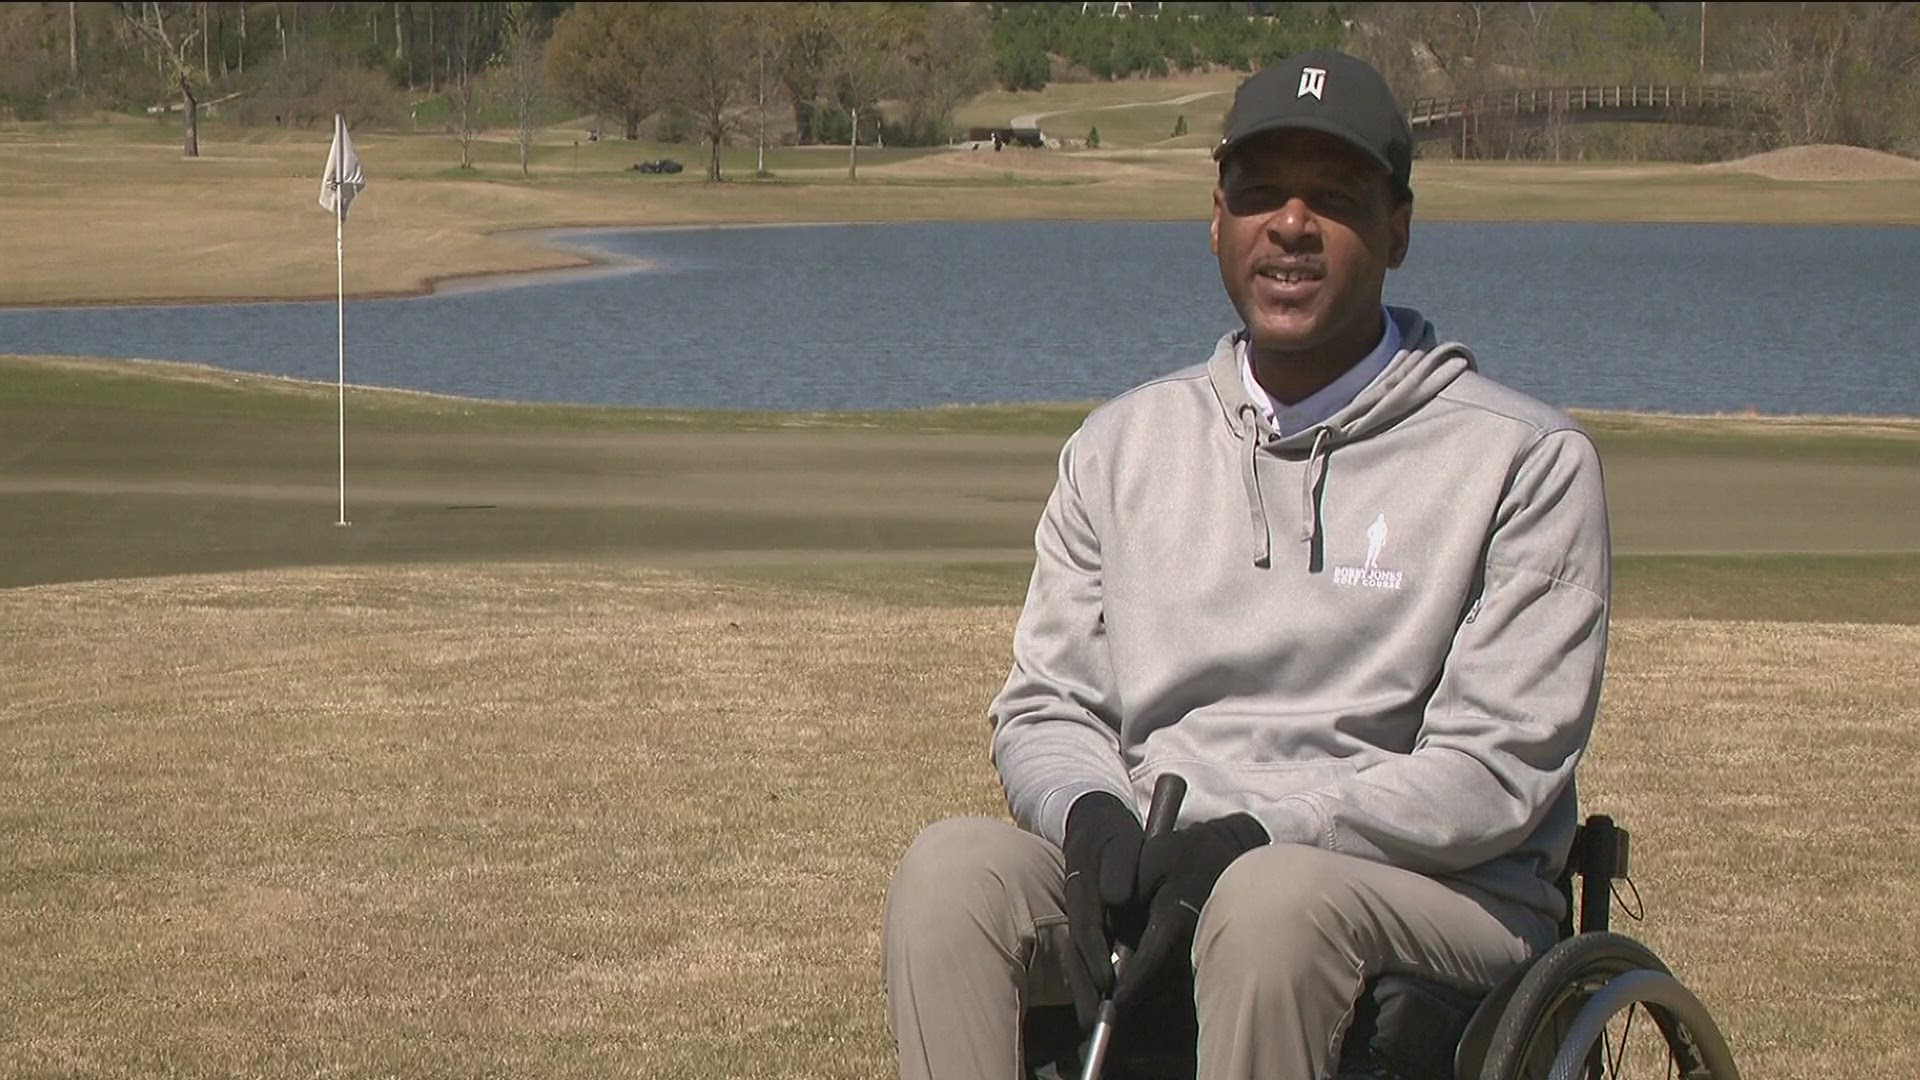 A golf pro in Atlanta is leading the way for what's possible on the course after a devastating accident threatened to side Marcus Williams' dream.